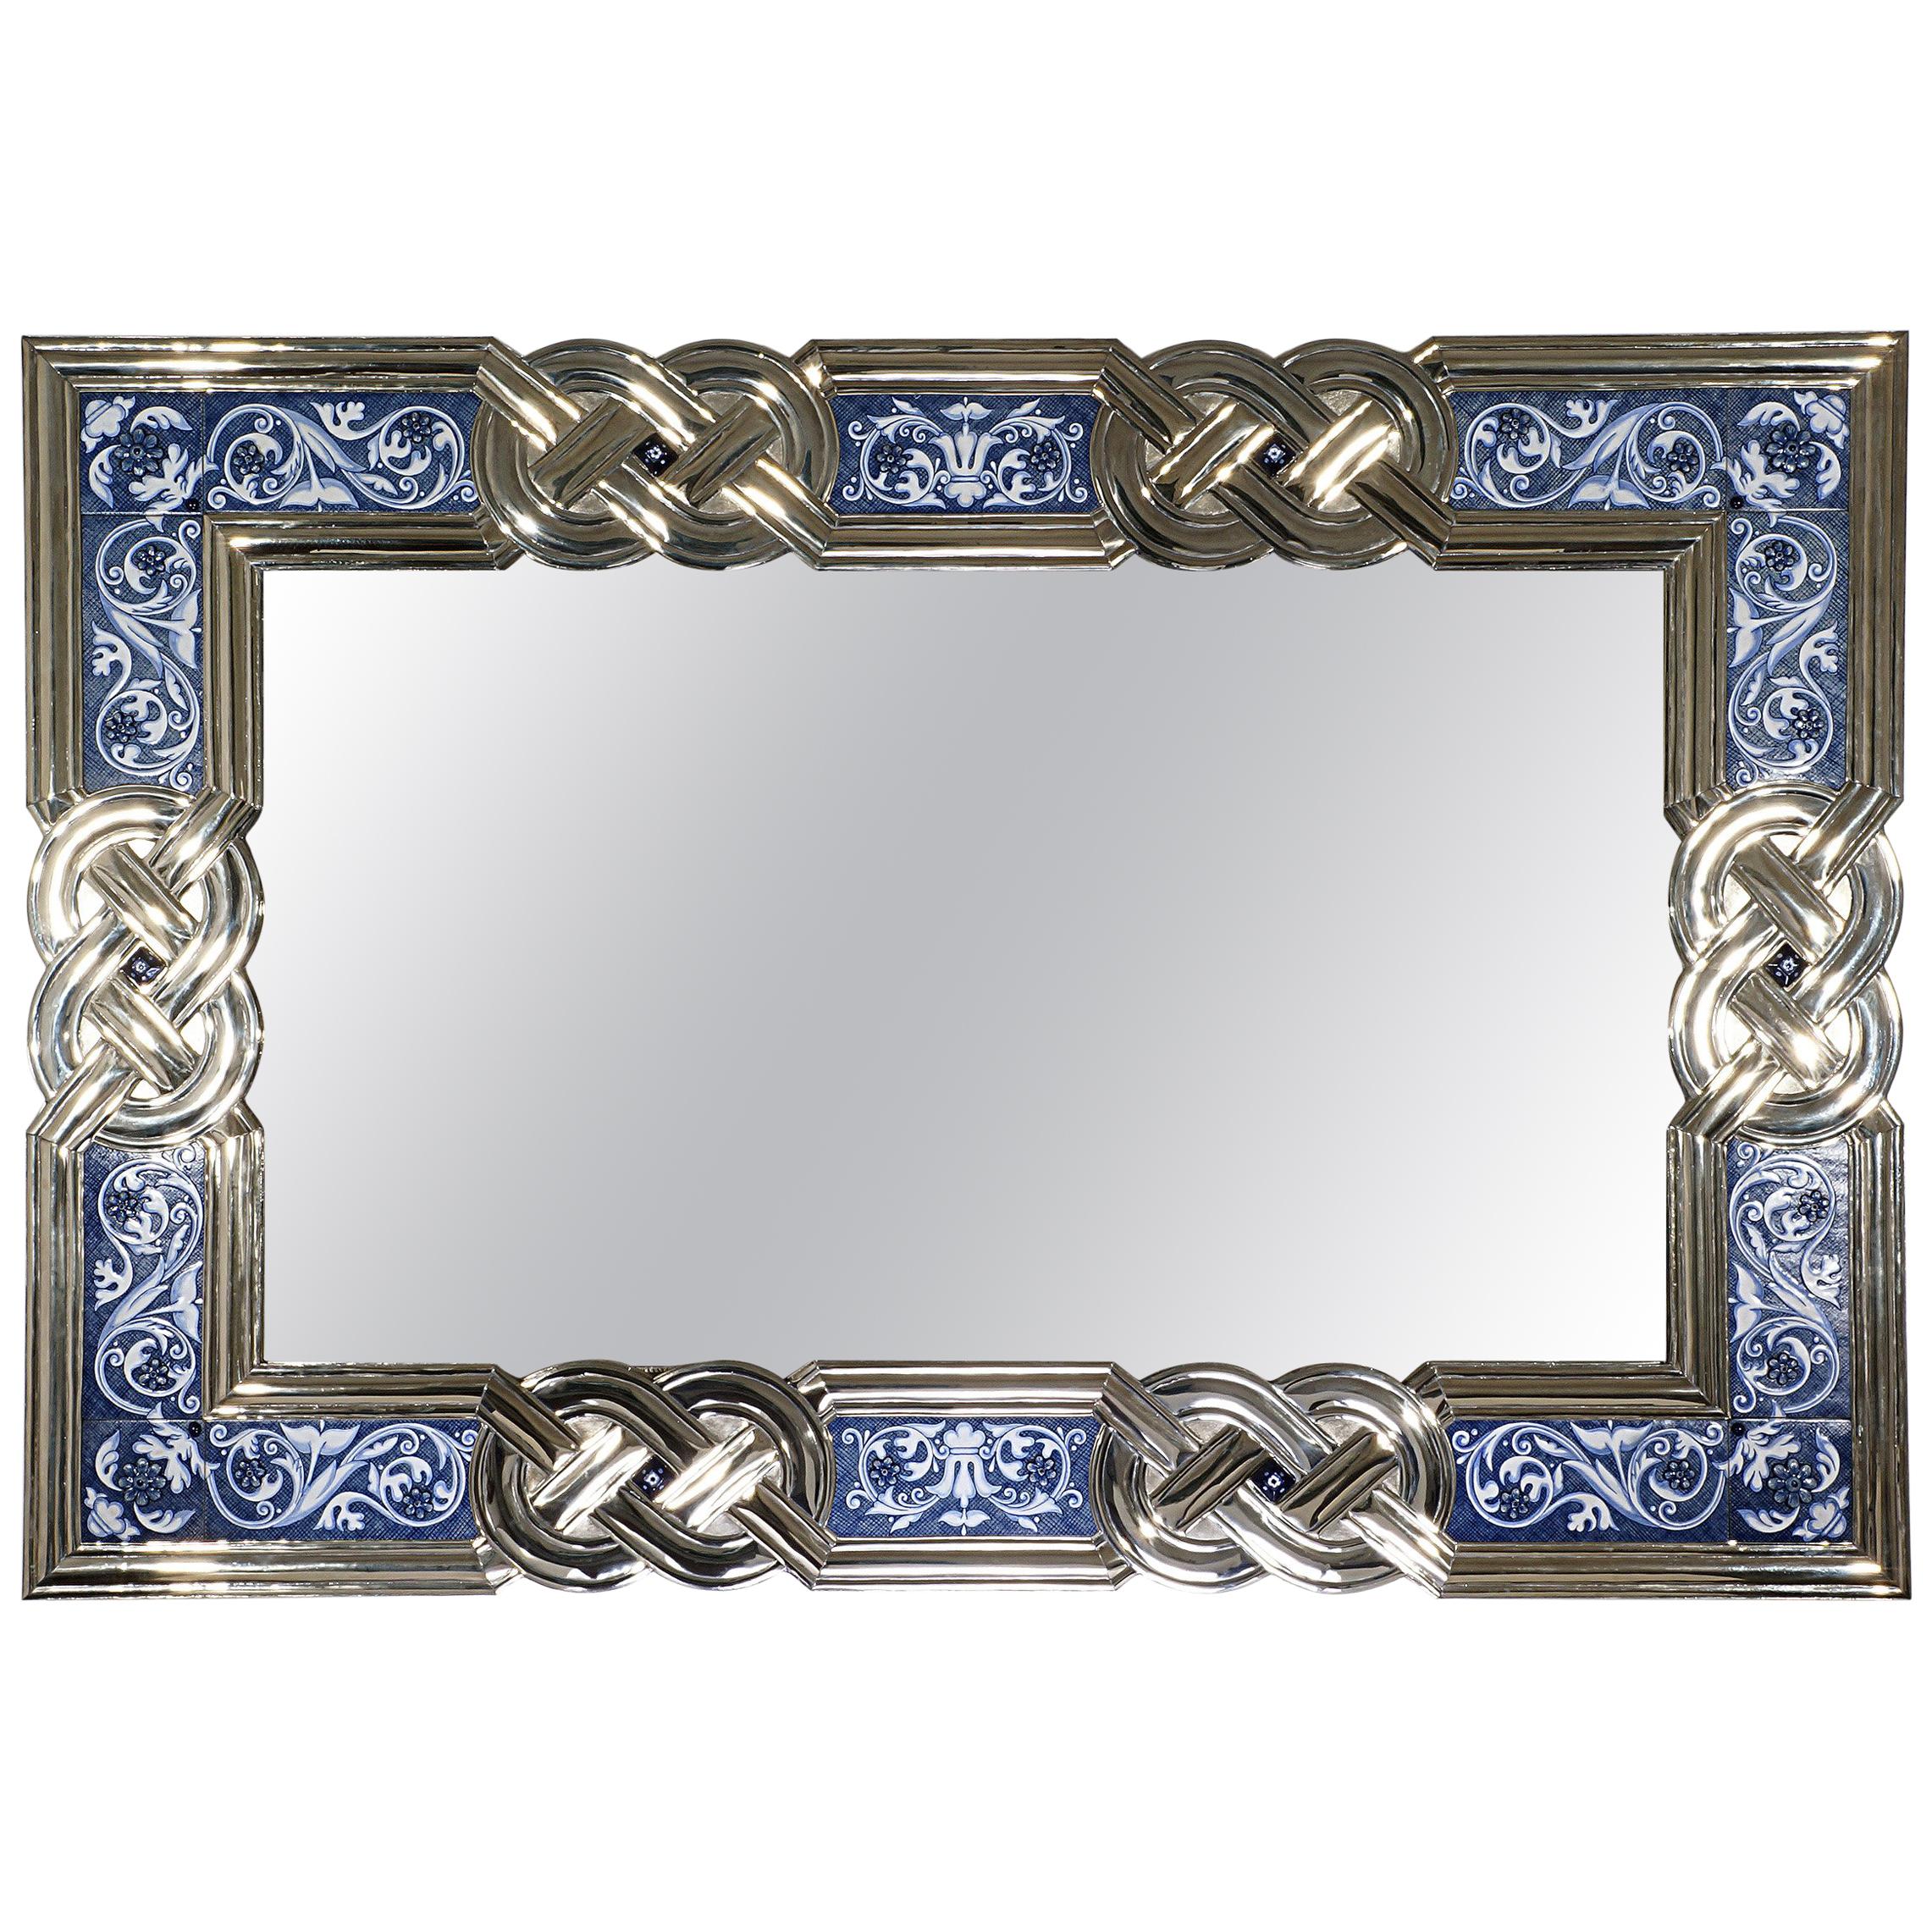 Mirror Frame, German Silver 'Also Called Alpaca or White Metal' and Ceramic For Sale